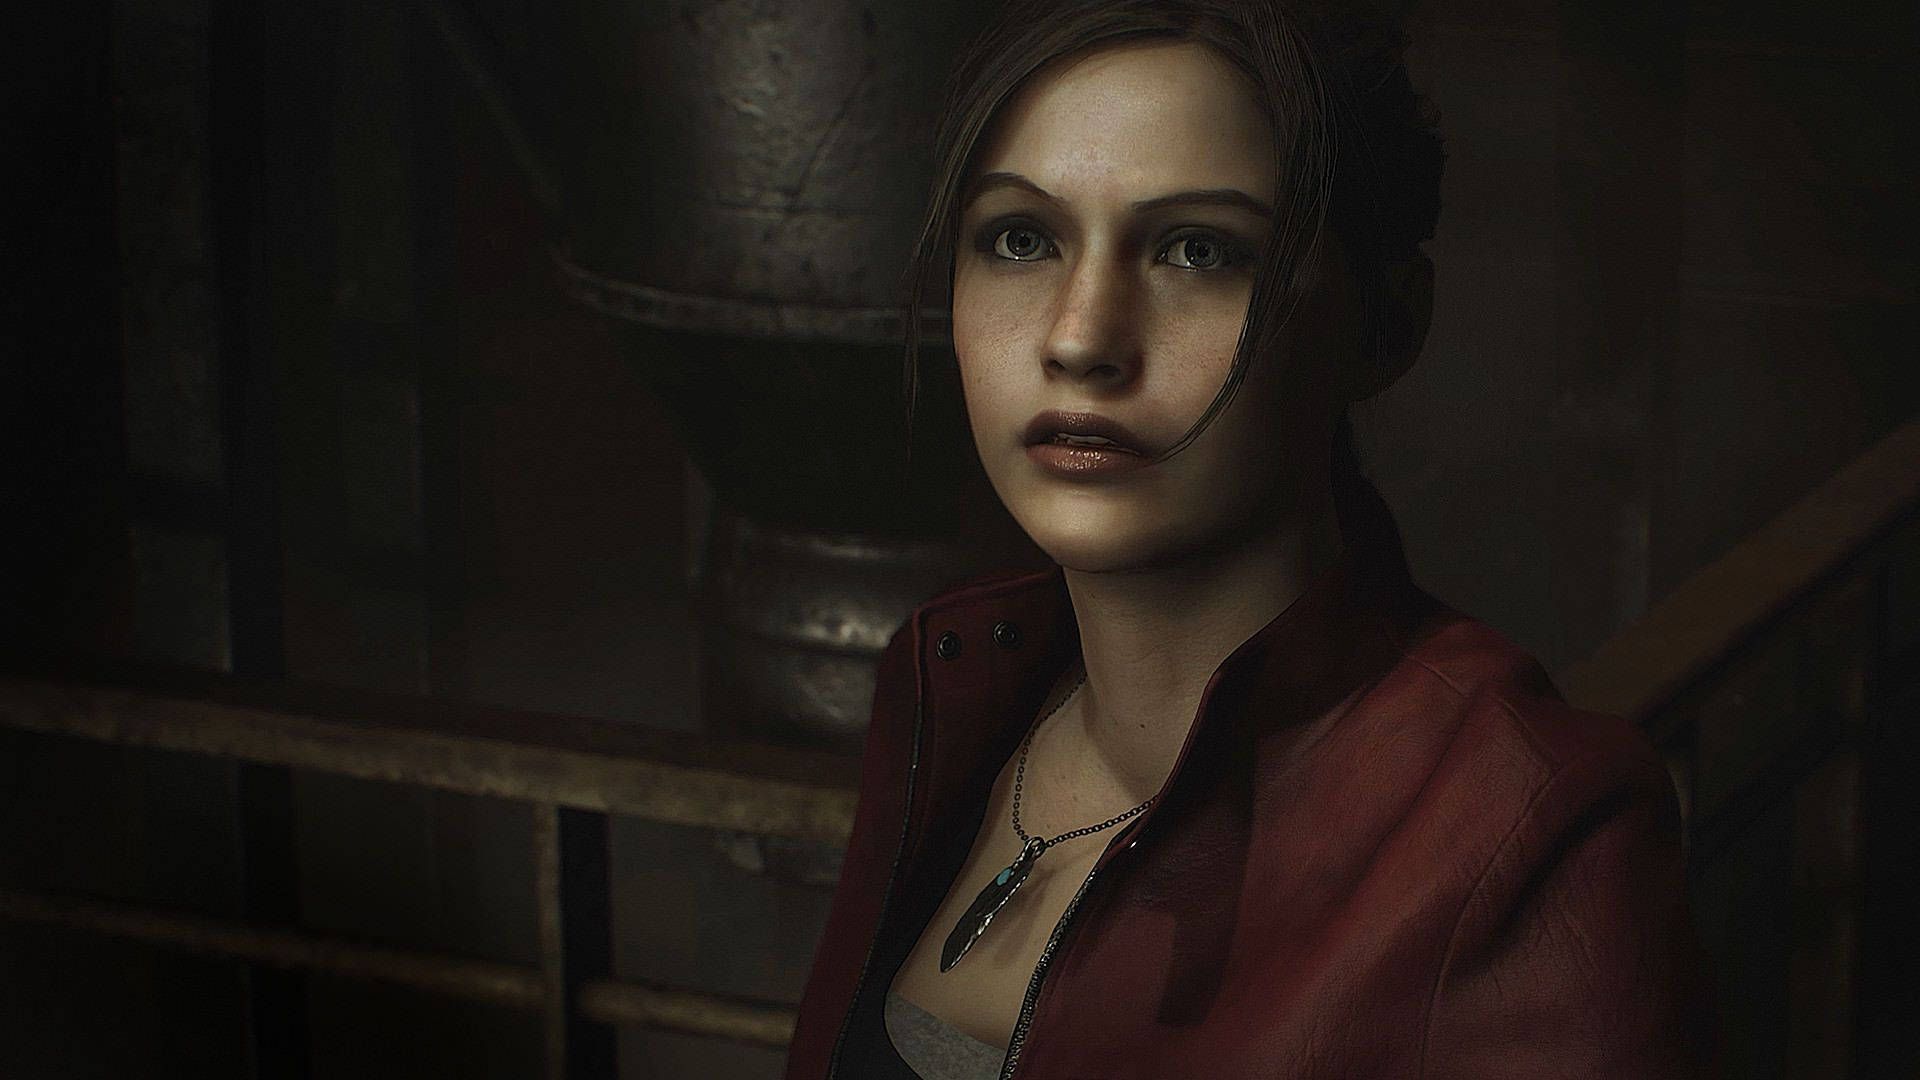 Claire Redfield battles zombies in Resident Evil 2 Remake Wallpaper